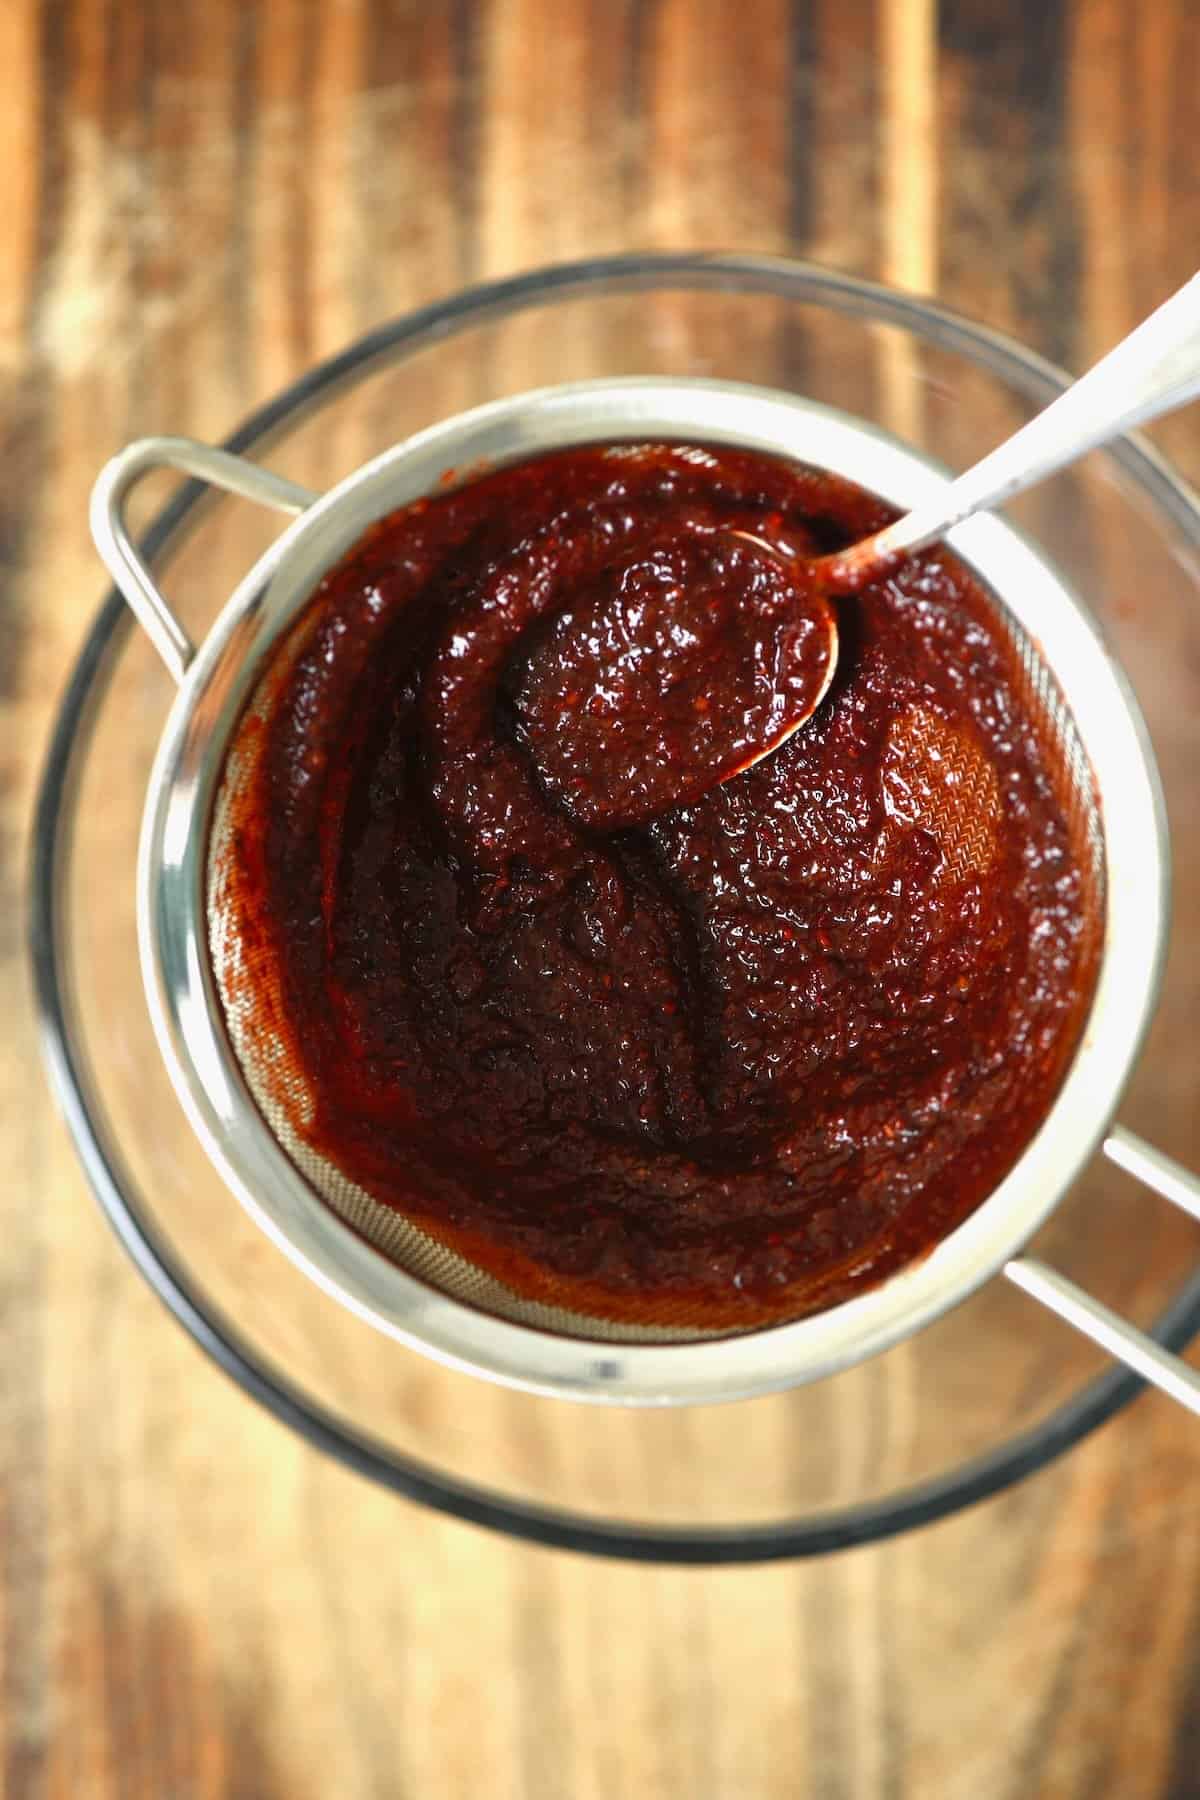 Passing chamoy through a sieve